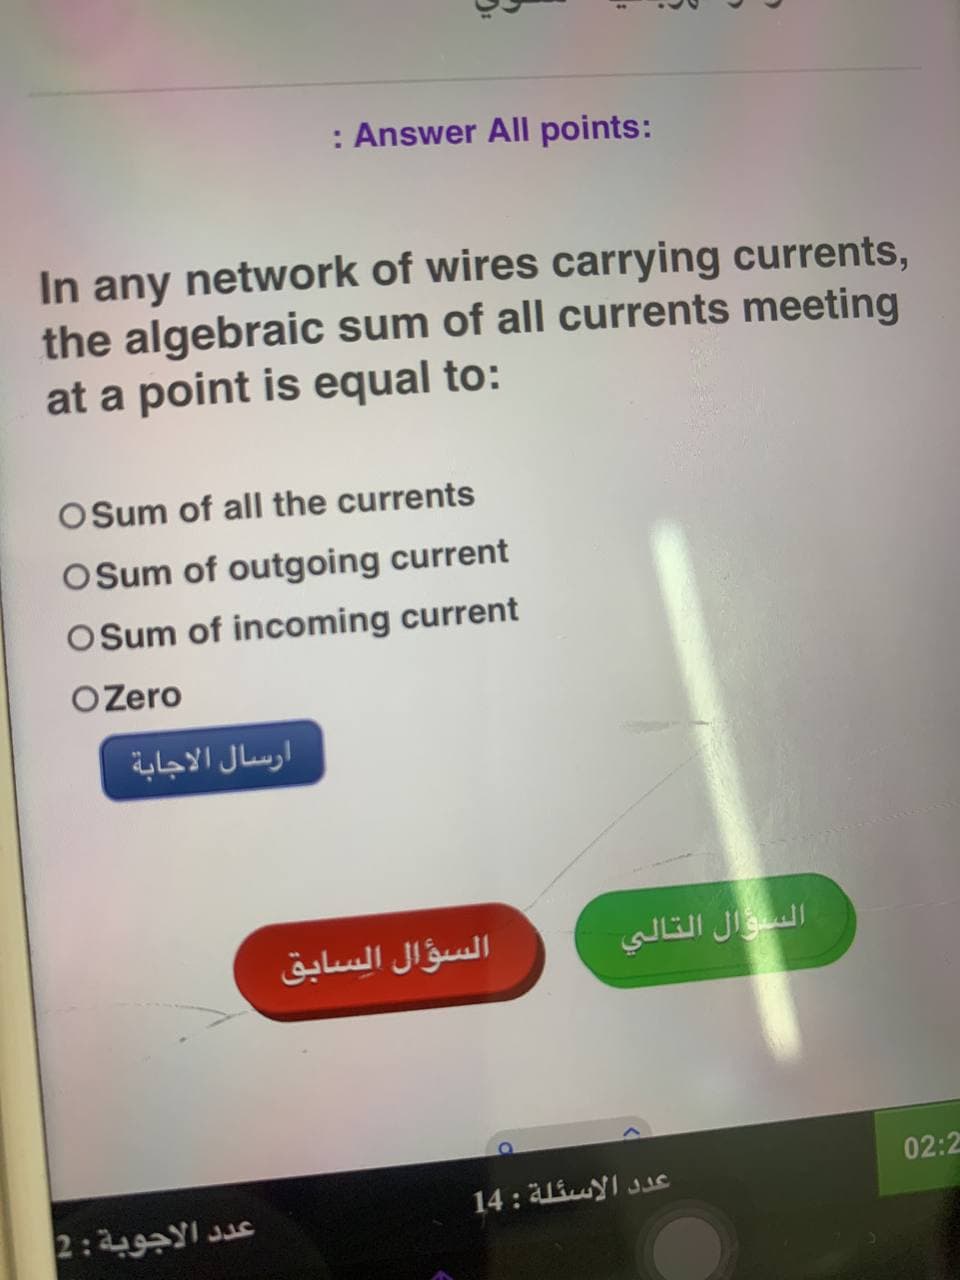 : Answer All points:
In any network of wires carrying currents,
the algebraic sum of all currents meeting
at a point is equal to:
OSum of all the currents
O Sum of outgoing current
O Sum of incoming current
O Zero
ارسال الاجابة
عدد الاجوبة : 2
السؤال السابق
السؤال التالي
عدد الاسئلة : 14
02:2